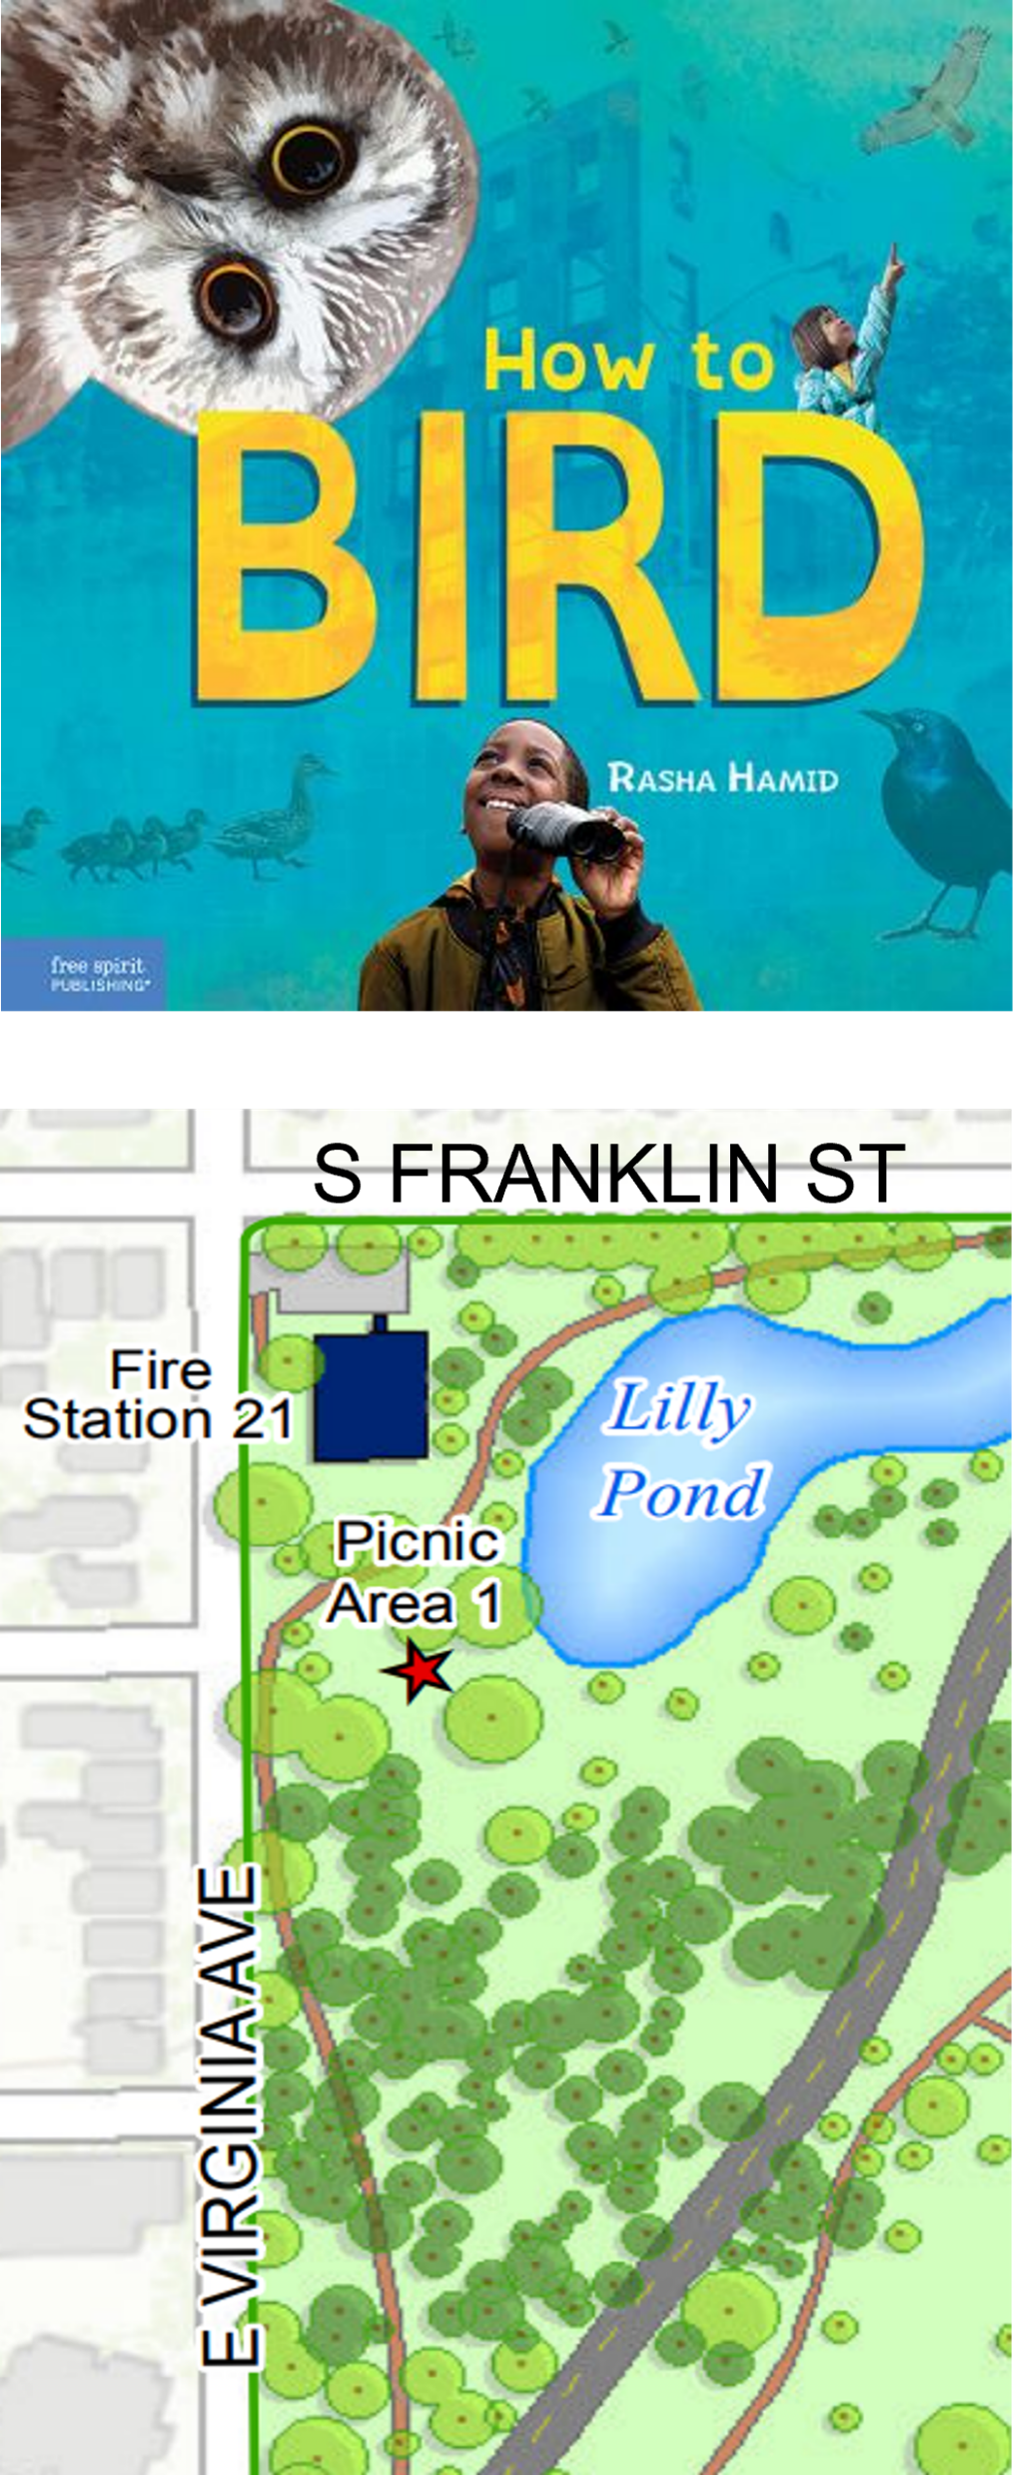 cover art and map for picnic area 1, Washington Park